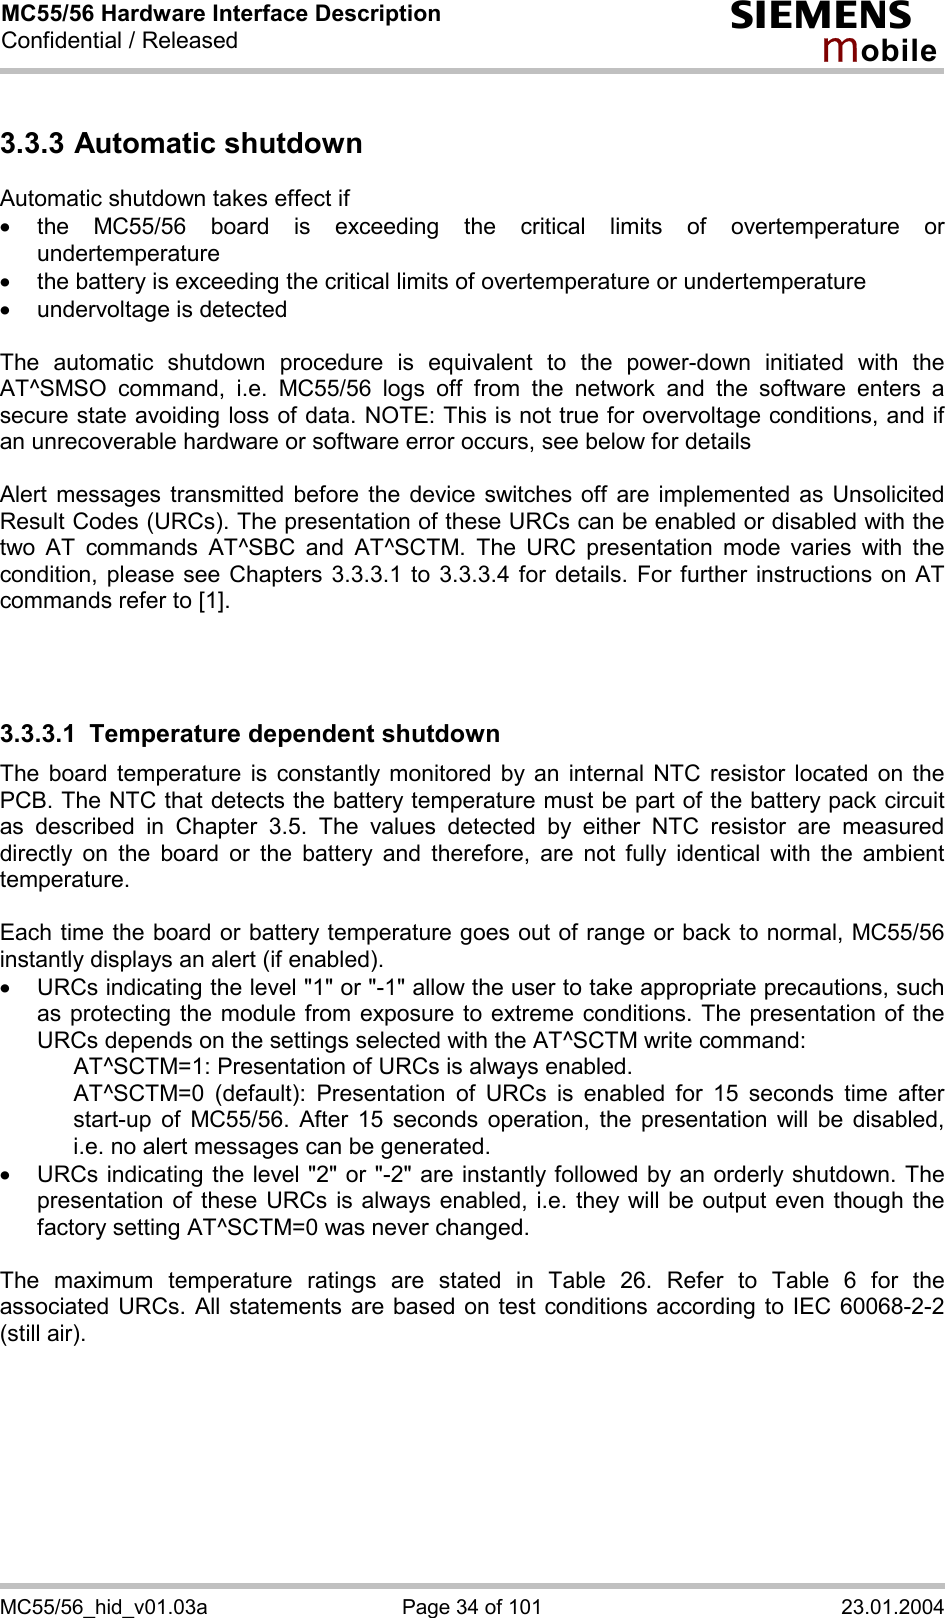 MC55/56 Hardware Interface Description Confidential / Released s mo b i l e MC55/56_hid_v01.03a  Page 34 of 101  23.01.2004 3.3.3 Automatic shutdown Automatic shutdown takes effect if ·  the MC55/56 board is exceeding the critical limits of overtemperature or undertemperature ·  the battery is exceeding the critical limits of overtemperature or undertemperature ·  undervoltage is detected  The automatic shutdown procedure is equivalent to the power-down initiated with the AT^SMSO command, i.e. MC55/56 logs off from the network and the software enters a secure state avoiding loss of data. NOTE: This is not true for overvoltage conditions, and if an unrecoverable hardware or software error occurs, see below for details  Alert messages transmitted before the device switches off are implemented as Unsolicited Result Codes (URCs). The presentation of these URCs can be enabled or disabled with the two AT commands AT^SBC and AT^SCTM. The URC presentation mode varies with the condition, please see Chapters 3.3.3.1 to 3.3.3.4 for details. For further instructions on AT commands refer to [1].    3.3.3.1  Temperature dependent shutdown The board temperature is constantly monitored by an internal NTC resistor located on the PCB. The NTC that detects the battery temperature must be part of the battery pack circuit as described in Chapter 3.5. The values detected by either NTC resistor are measured directly on the board or the battery and therefore, are not fully identical with the ambient temperature.   Each time the board or battery temperature goes out of range or back to normal, MC55/56 instantly displays an alert (if enabled). ·  URCs indicating the level &quot;1&quot; or &quot;-1&quot; allow the user to take appropriate precautions, such as protecting the module from exposure to extreme conditions. The presentation of the URCs depends on the settings selected with the AT^SCTM write command:     AT^SCTM=1: Presentation of URCs is always enabled.      AT^SCTM=0 (default): Presentation of URCs is enabled for 15 seconds time after start-up of MC55/56. After 15 seconds operation, the presentation will be disabled, i.e. no alert messages can be generated.  ·  URCs indicating the level &quot;2&quot; or &quot;-2&quot; are instantly followed by an orderly shutdown. The presentation of these URCs is always enabled, i.e. they will be output even though the factory setting AT^SCTM=0 was never changed.  The maximum temperature ratings are stated in Table 26. Refer to Table 6 for the associated URCs. All statements are based on test conditions according to IEC 60068-2-2 (still air).  